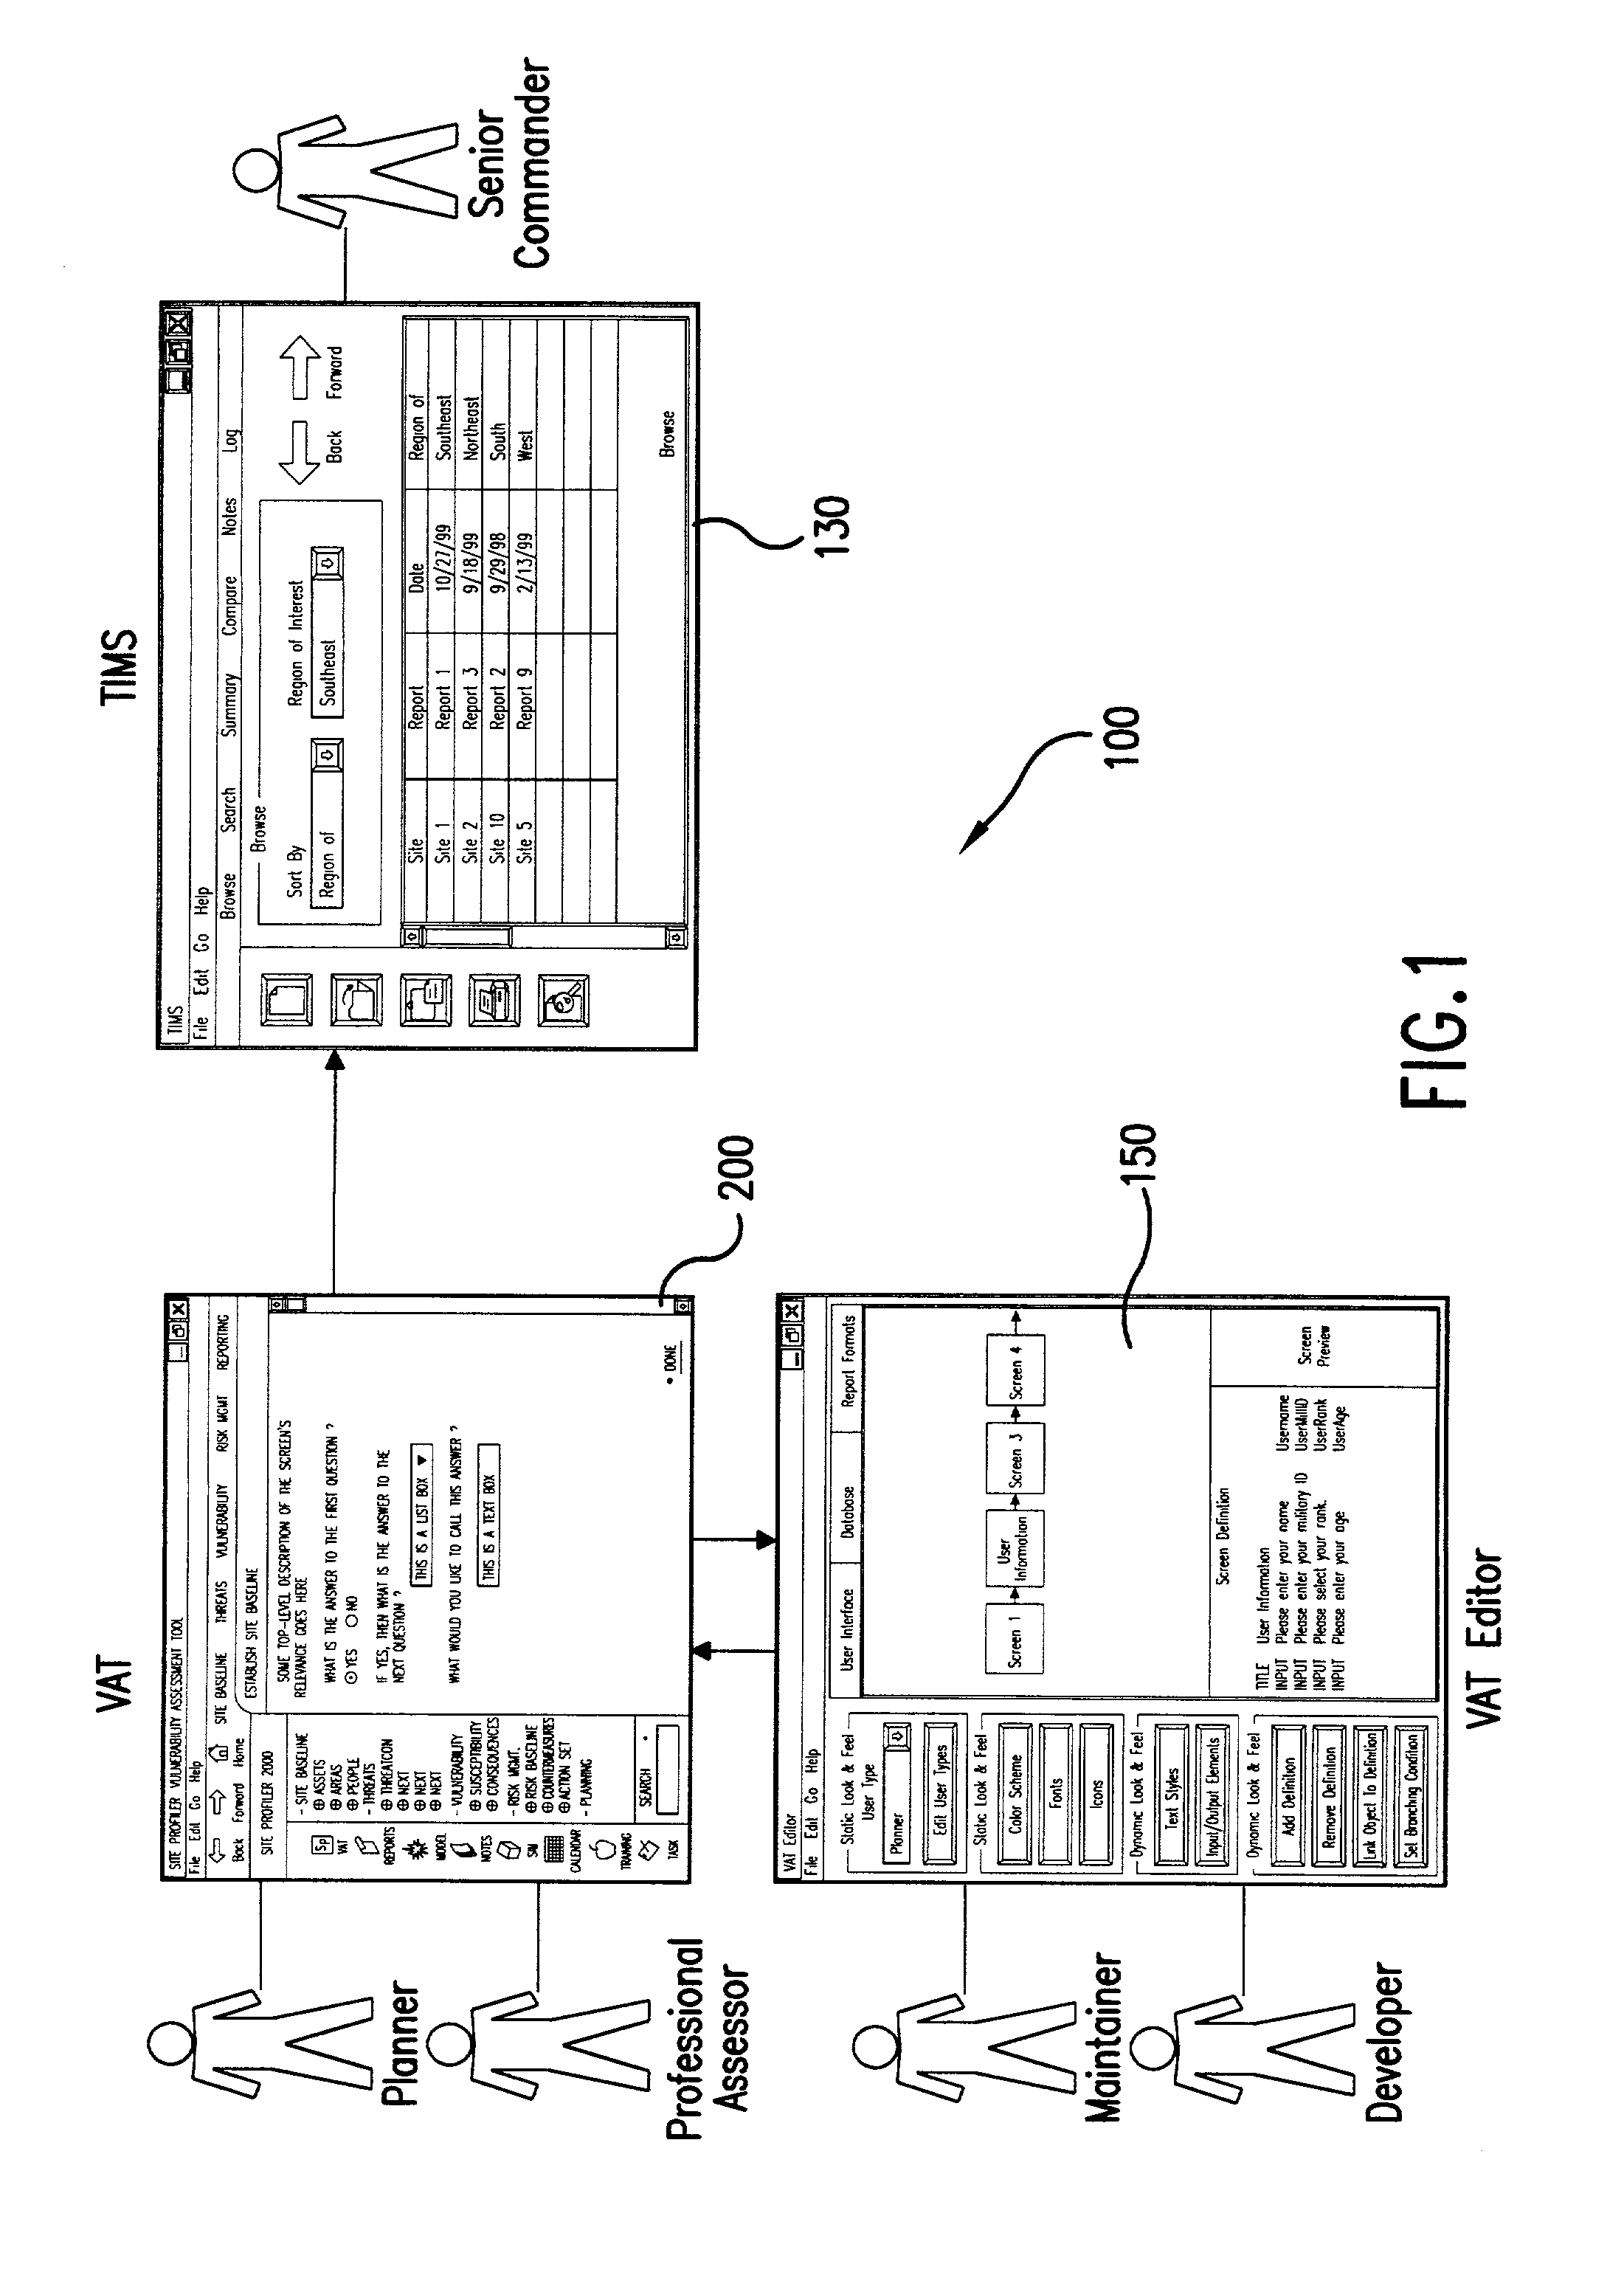 Method and apparatus for risk management